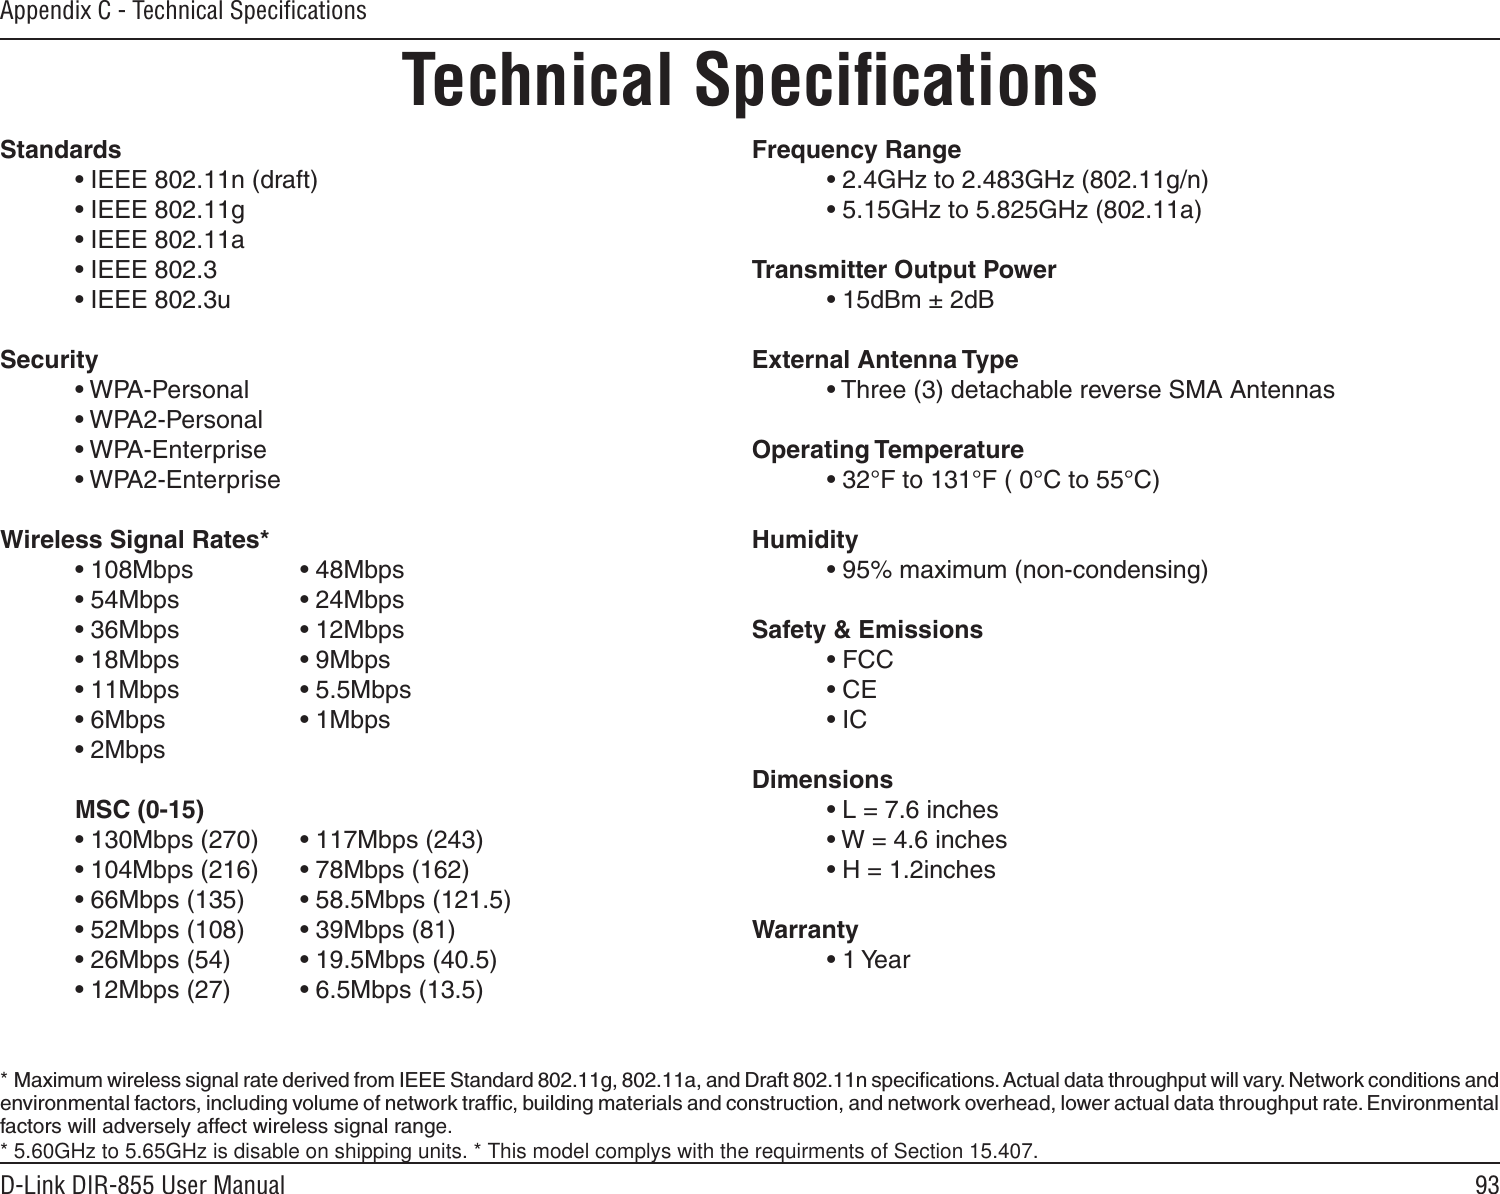 93D-Link DIR-855 User ManualAppendix C - Technical SpeciﬁcationsTechnical SpeciﬁcationsStandards  • IEEE 802.11n (draft)  • IEEE 802.11g  • IEEE 802.11a  • IEEE 802.3  • IEEE 802.3uSecurity  • WPA-Personal  • WPA2-Personal  • WPA-Enterprise  • WPA2-Enterprise Wireless Signal Rates* • 108Mbps     • 48Mbps  • 54Mbps     • 24Mbps  • 36Mbps    • 12Mbps  • 18Mbps     • 9Mbps  • 11Mbps     • 5.5Mbps  • 6Mbps     • 1Mbps  • 2Mbps       MSC (0-15)  • 130Mbps (270)  • 117Mbps (243)  • 104Mbps (216)  • 78Mbps (162)  • 66Mbps (135)  • 58.5Mbps (121.5)  • 52Mbps (108)  • 39Mbps (81)  • 26Mbps (54)  • 19.5Mbps (40.5)  • 12Mbps (27)  • 6.5Mbps (13.5) Frequency Range  • 2.4GHz to 2.483GHz (802.11g/n)  • 5.15GHz to 5.825GHz (802.11a)Transmitter Output Power  • 15dBm ± 2dBExternal Antenna Type  • Three (3) detachable reverse SMA AntennasOperating Temperature  • 32°F to 131°F ( 0°C to 55°C)Humidity  • 95% maximum (non-condensing)Safety &amp; Emissions  • FCC    • CE  • ICDimensions  • L = 7.6 inches  • W = 4.6 inches  • H = 1.2inchesWarranty  • 1 Year*  Maximum wireless signal rate derived from IEEE Standard 802.11g, 802.11a, and Draft 802.11n speciﬁcations. Actual data throughput will vary. Network conditions and environmental factors, including volume of network trafﬁc, building materials and construction, and network overhead, lower actual data throughput rate. Environmental factors will adversely affect wireless signal range. * 5.60GHz to 5.65GHz is disable on shipping units. * This model complys with the requirments of Section 15.407.